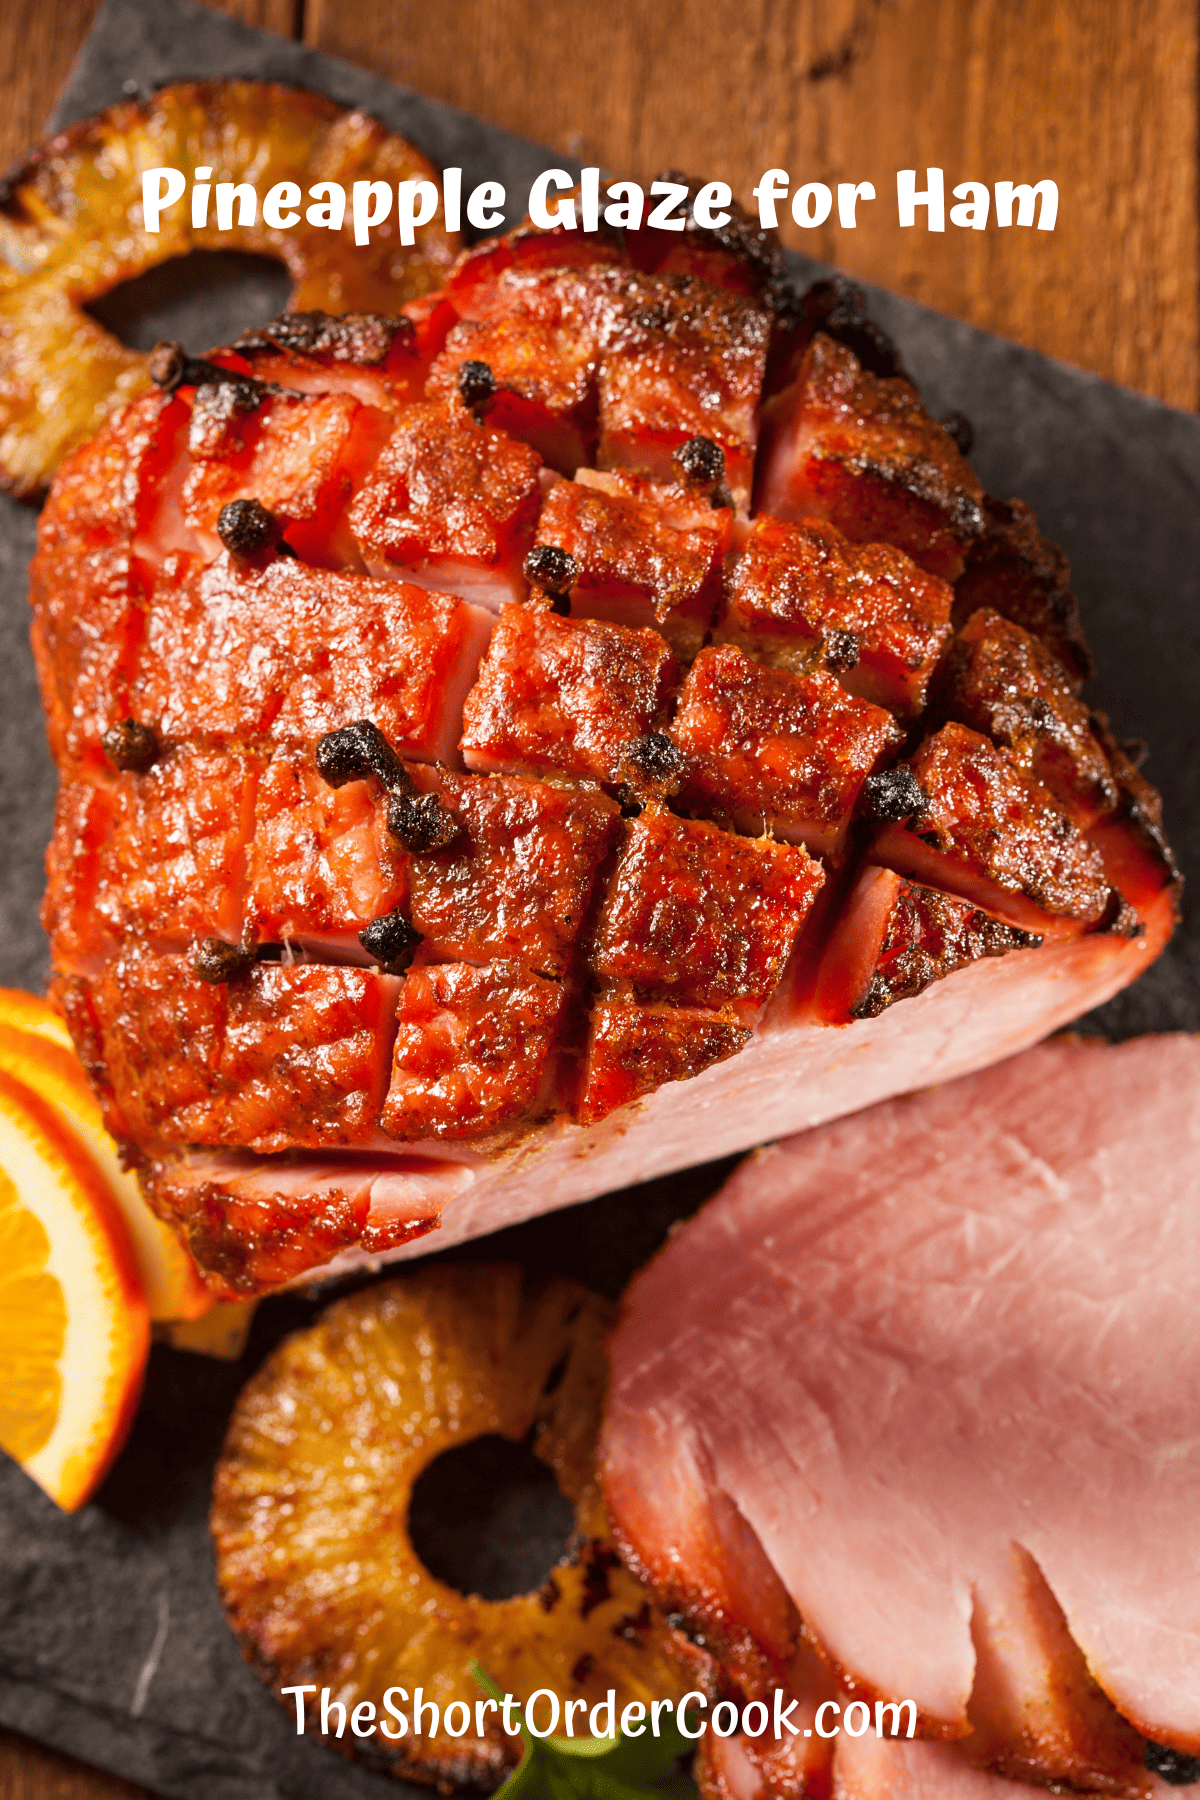 Whole ham topped with a pineapple glaze and cloves.